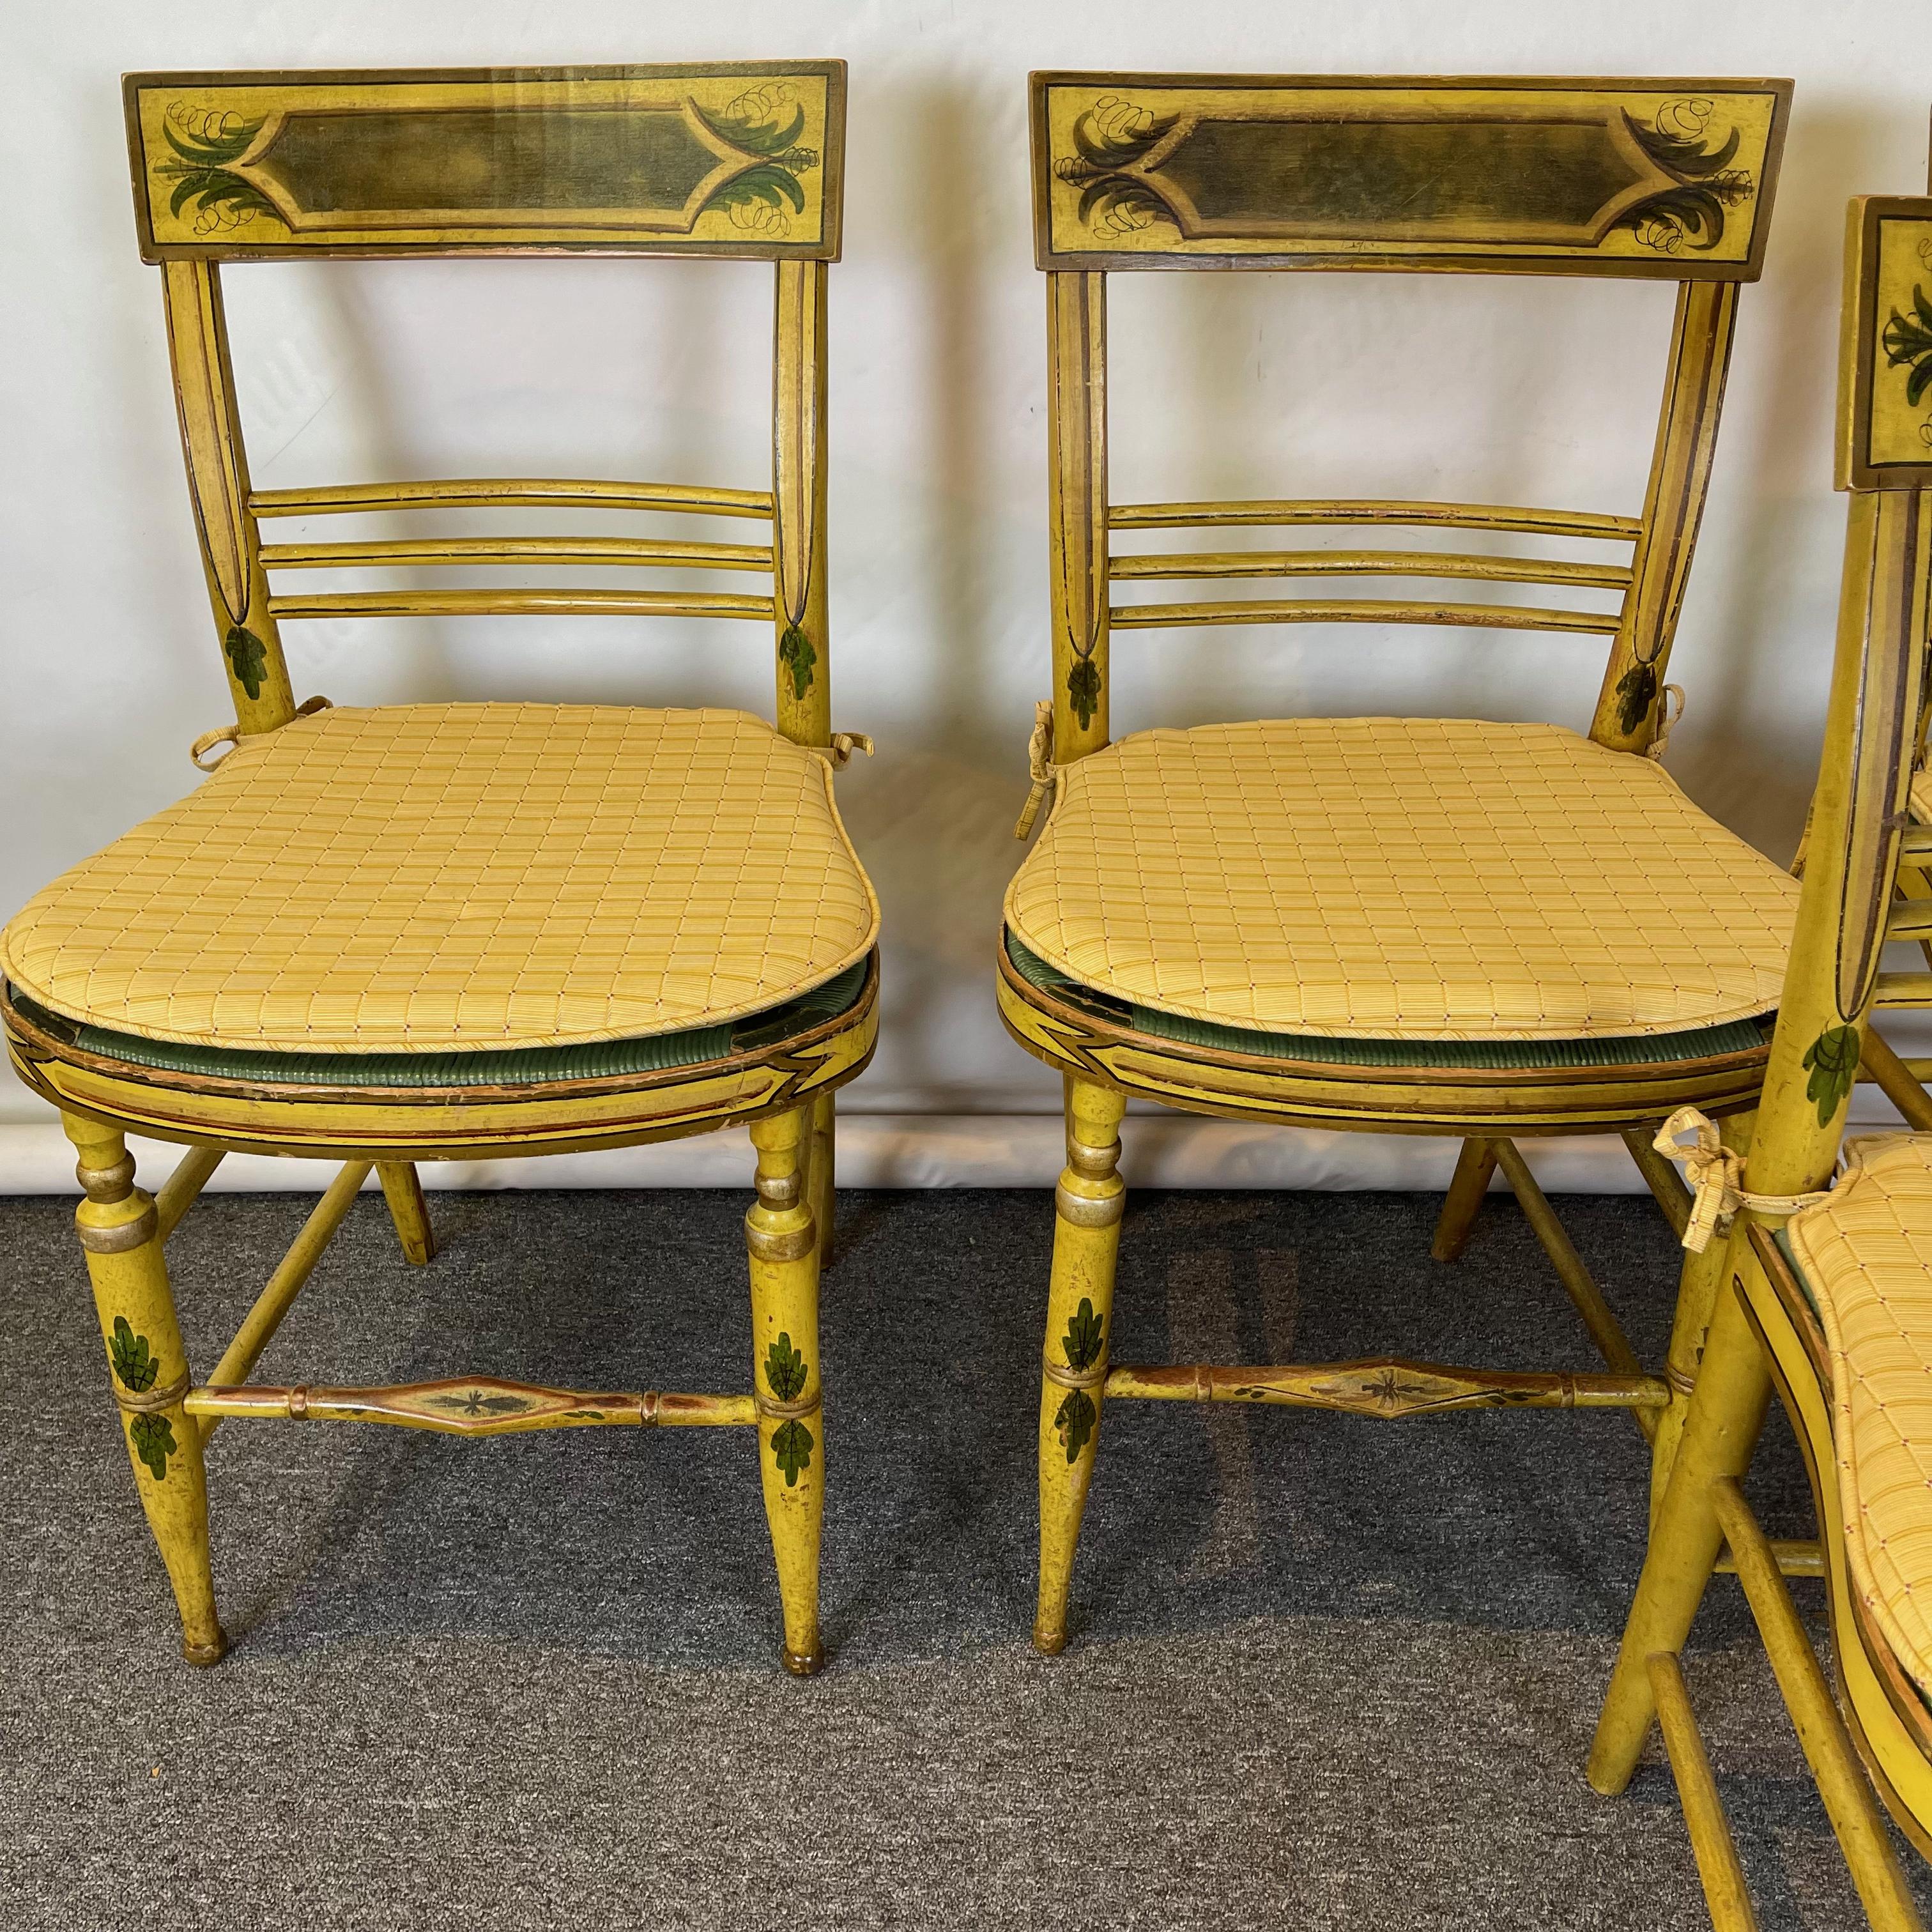 American Classical Set of Four Early 19th Century American Paint Decorated Fancy Chairs